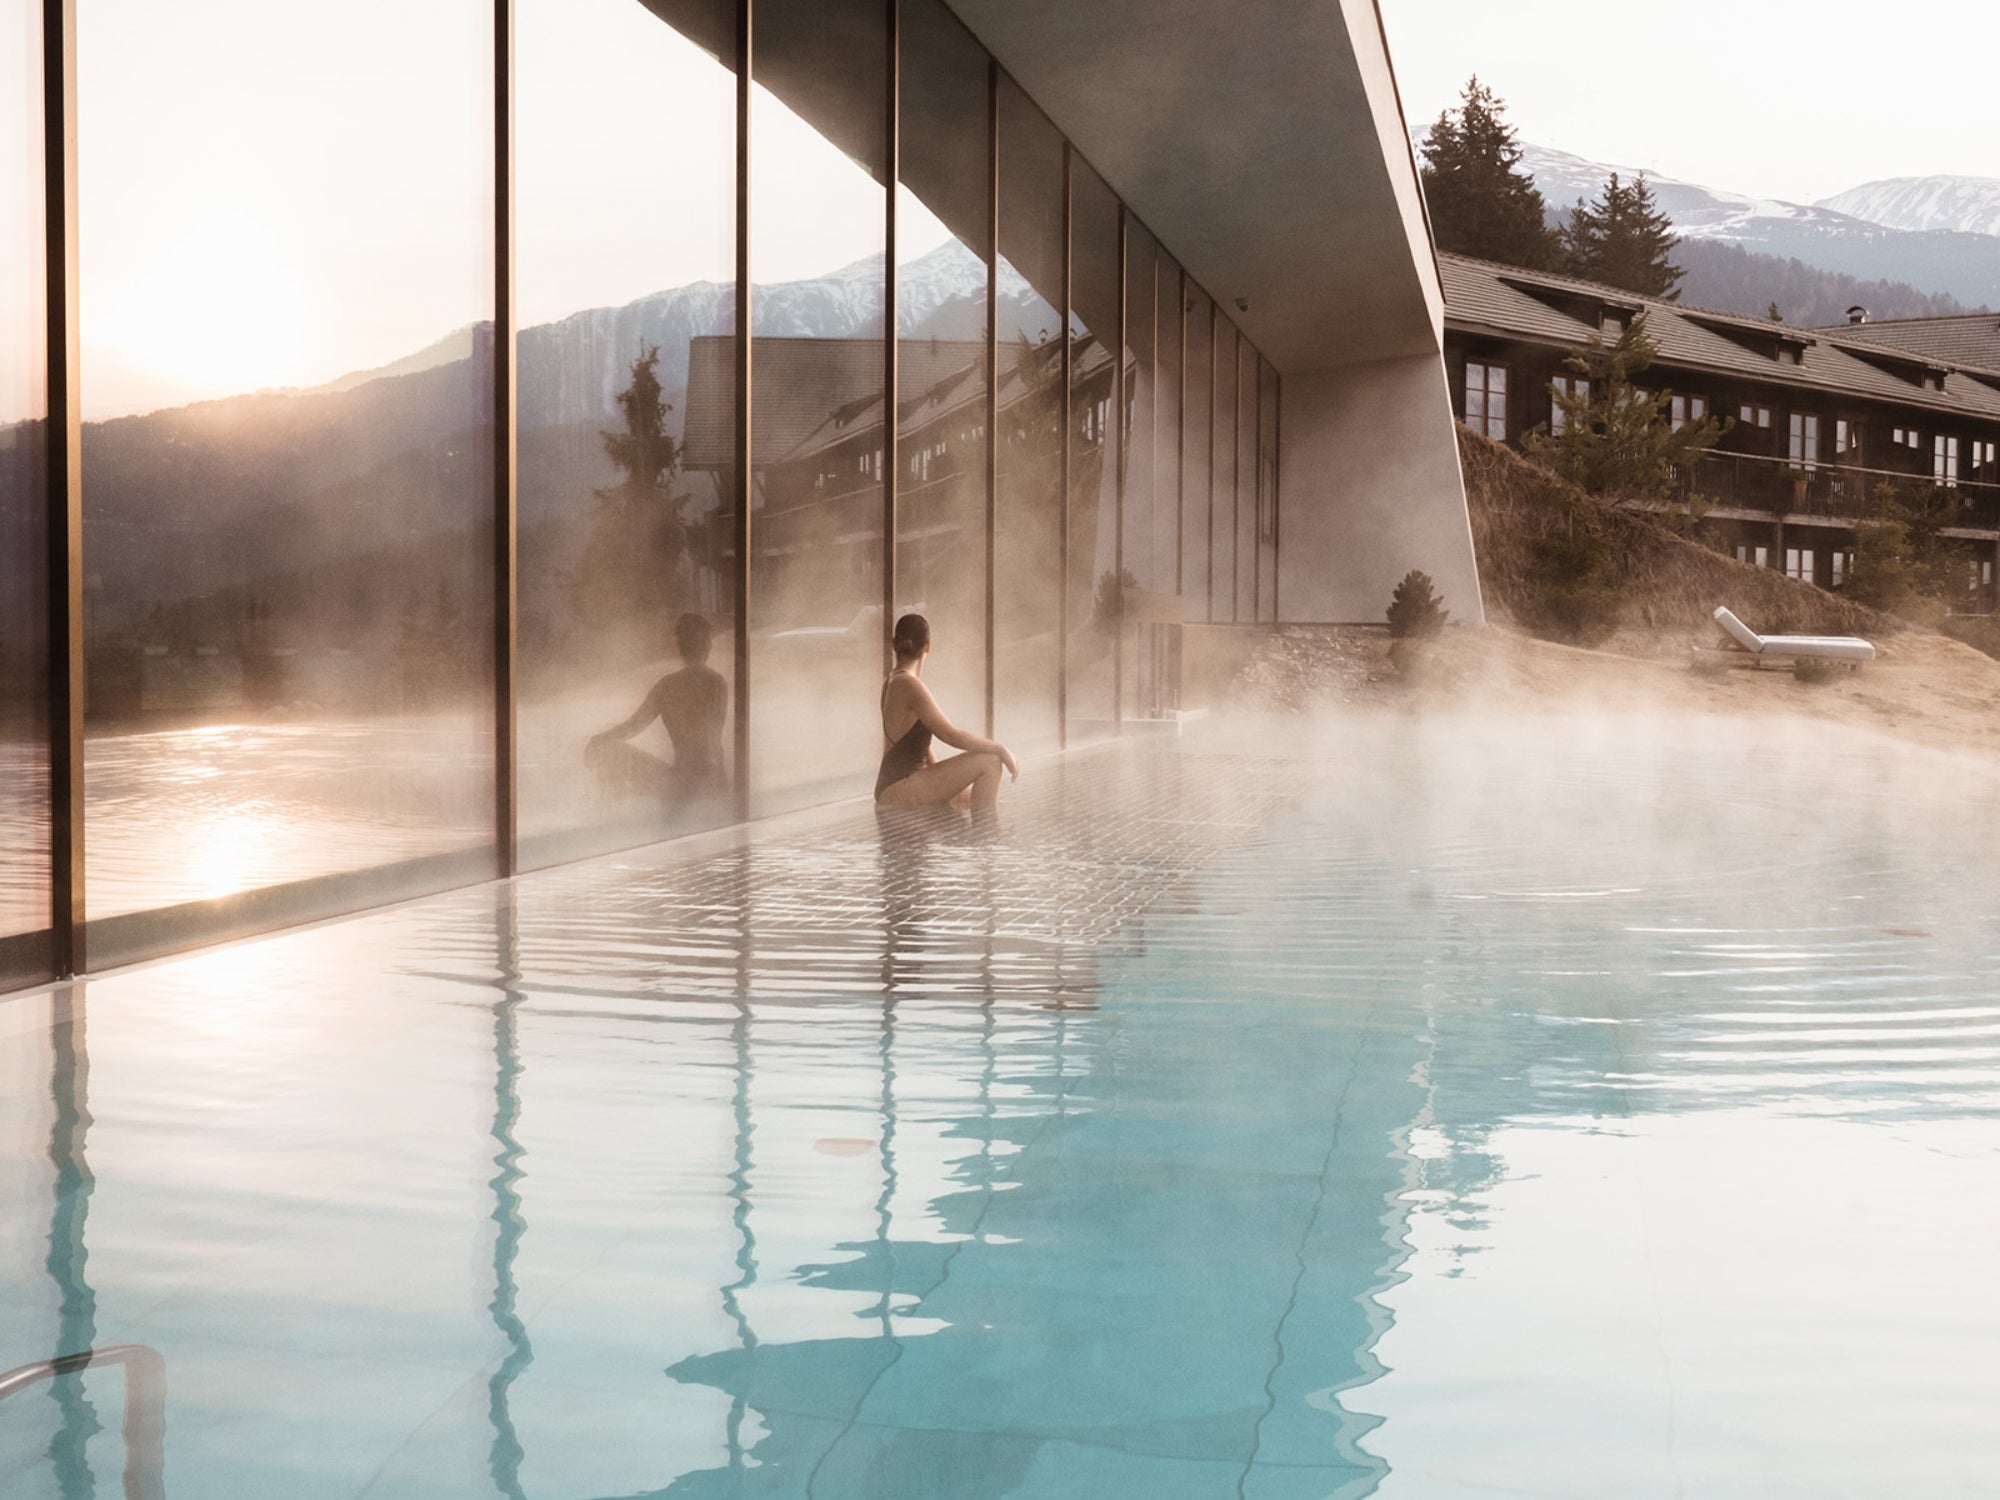 Outdoors pool of Hotel Forestis Dolomites, on a cold early spring morning